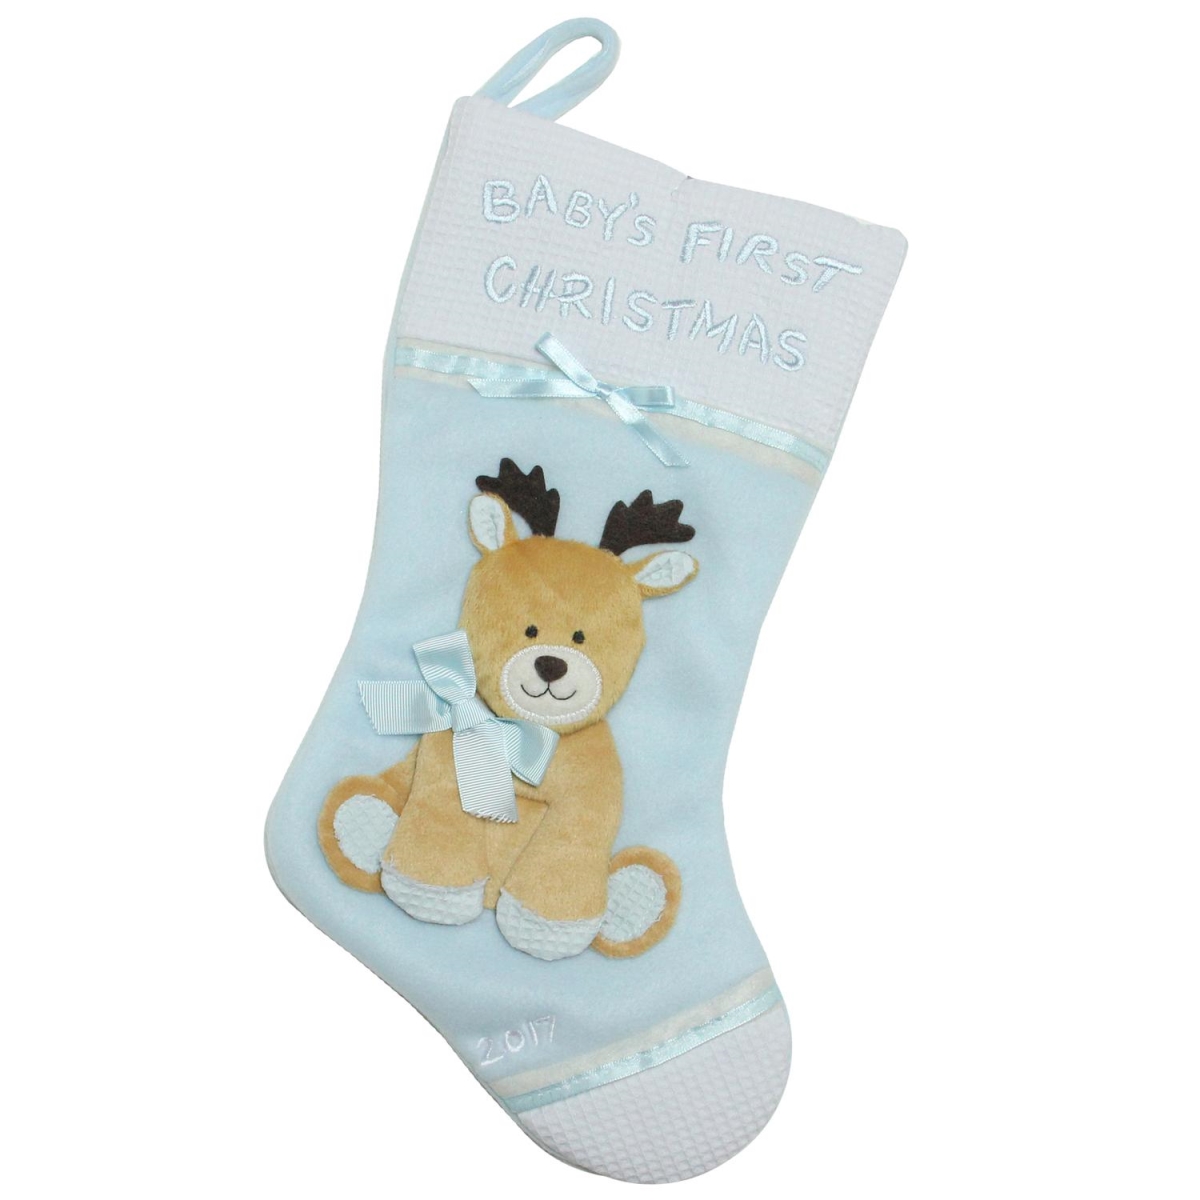 32629163 16 In. Blue & White Babys First Christmas With Reindeer Applique Fleece Christmas Stocking